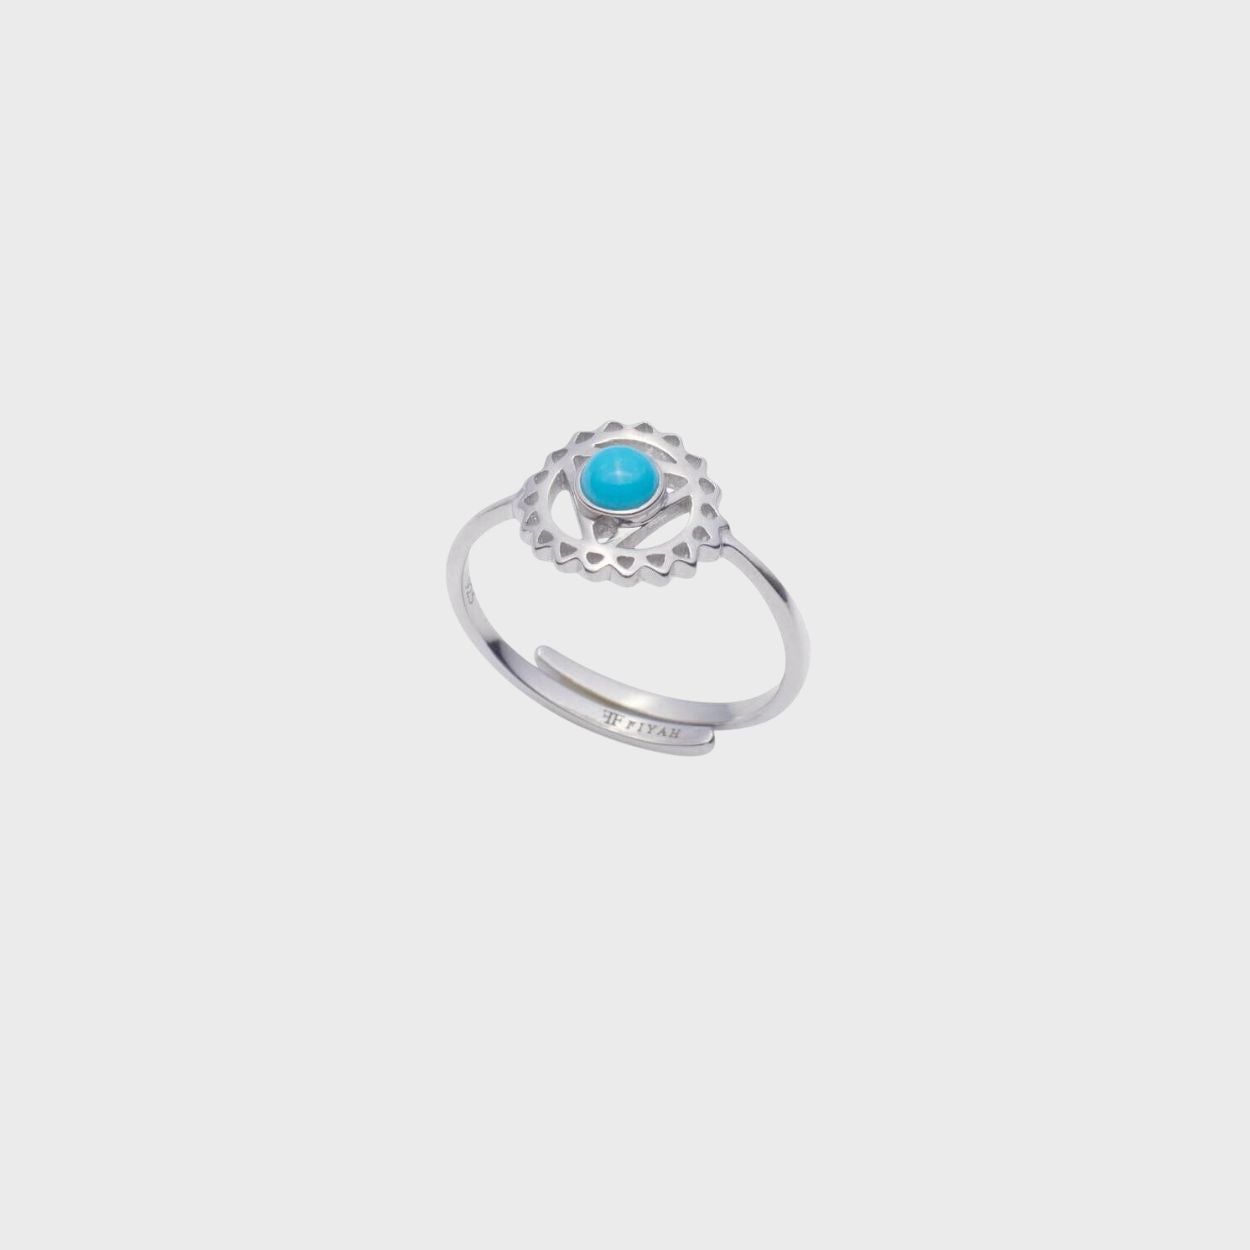 Adjustable Silver & Turquoise Throat Chakra Ring